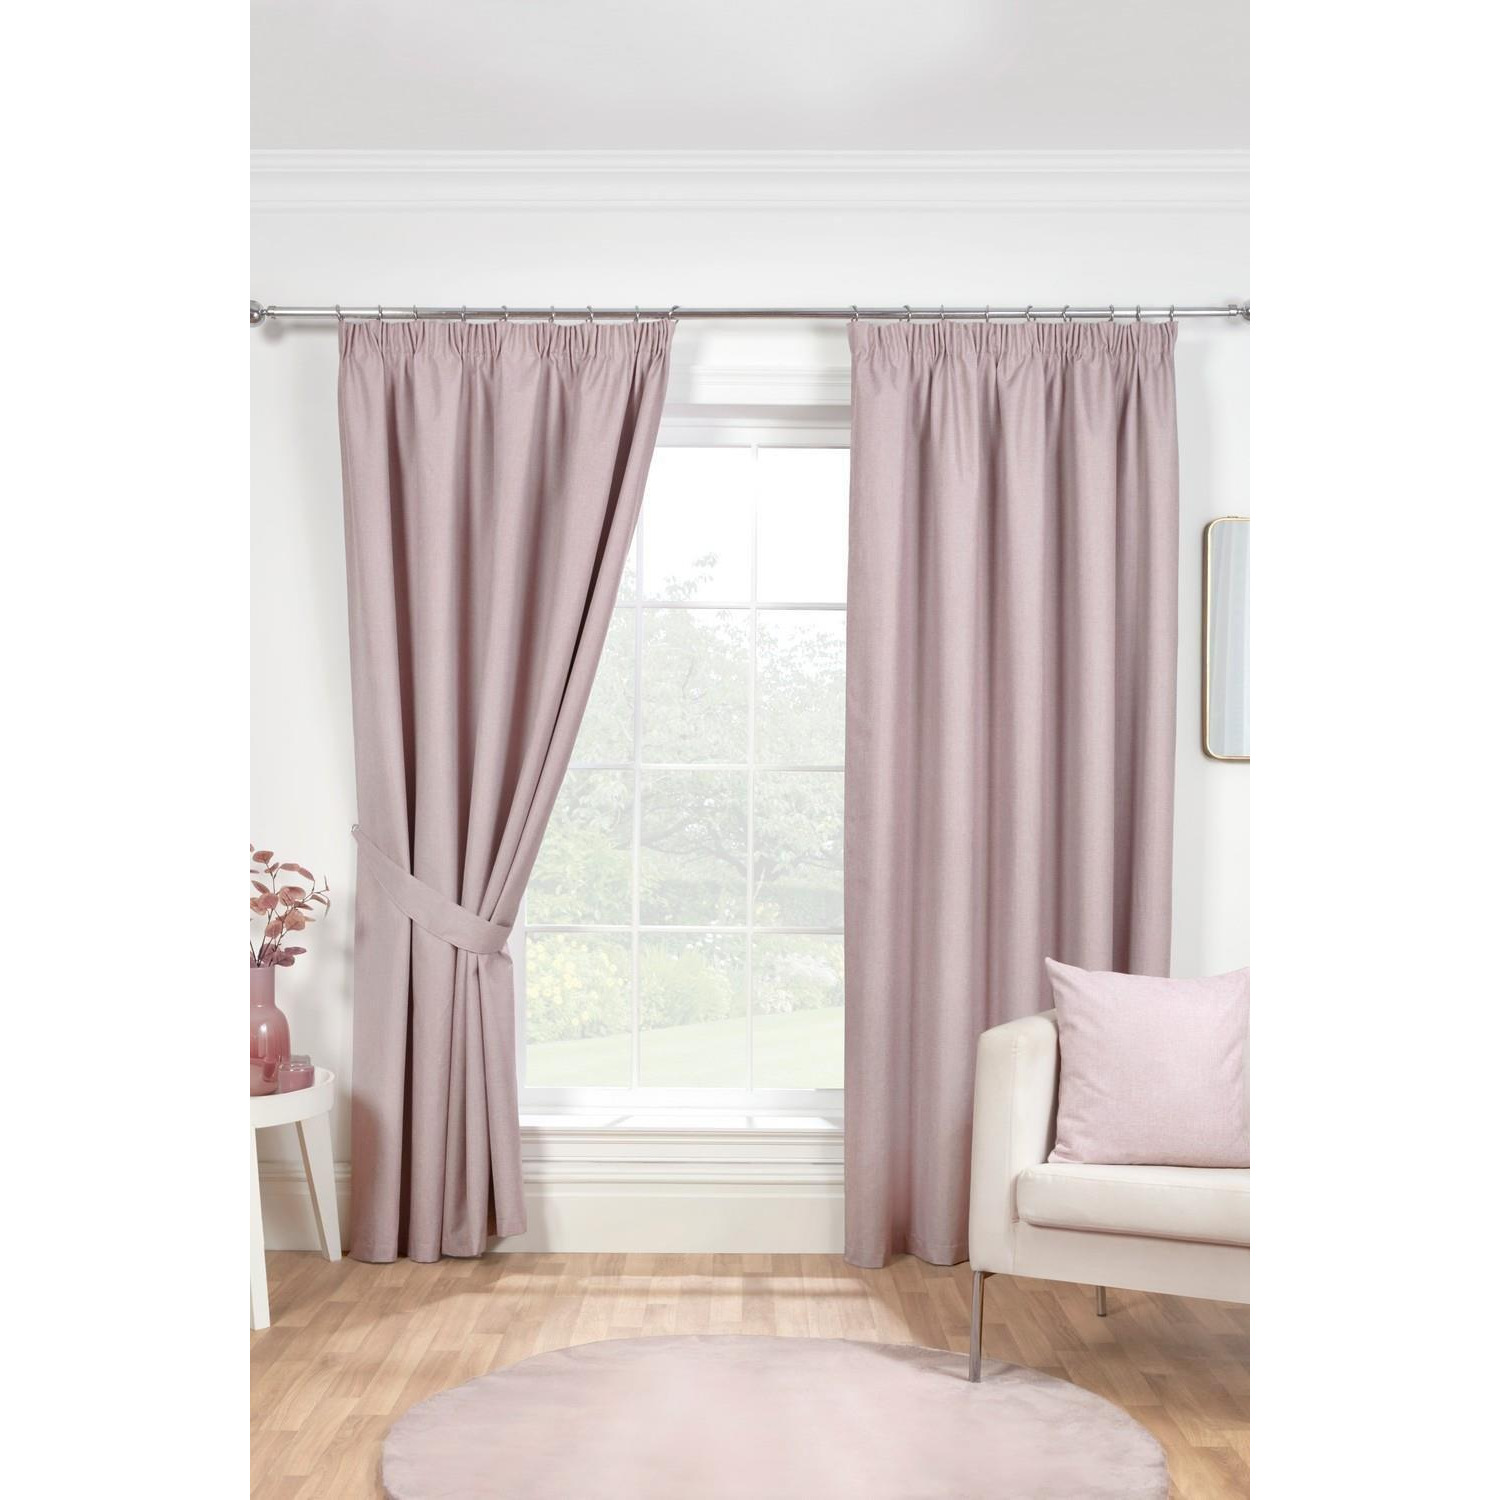 Eclipse Pencil Pleat Blackout Curtains Taped Curtain Pair - image 1